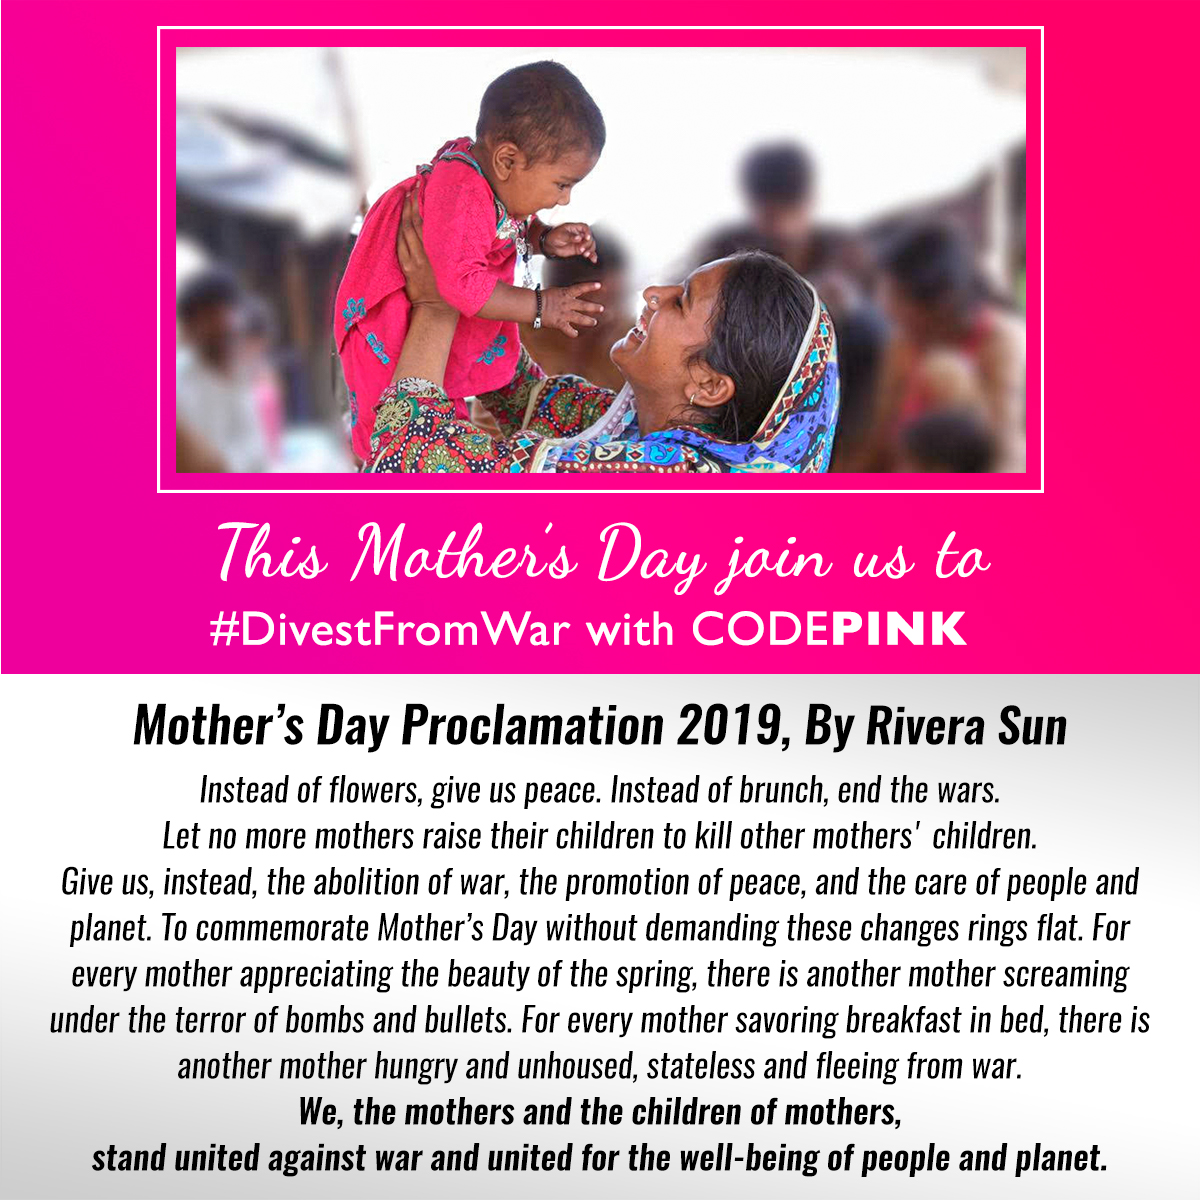 Mother's Day Proclamation 2019 by Rivera Sun